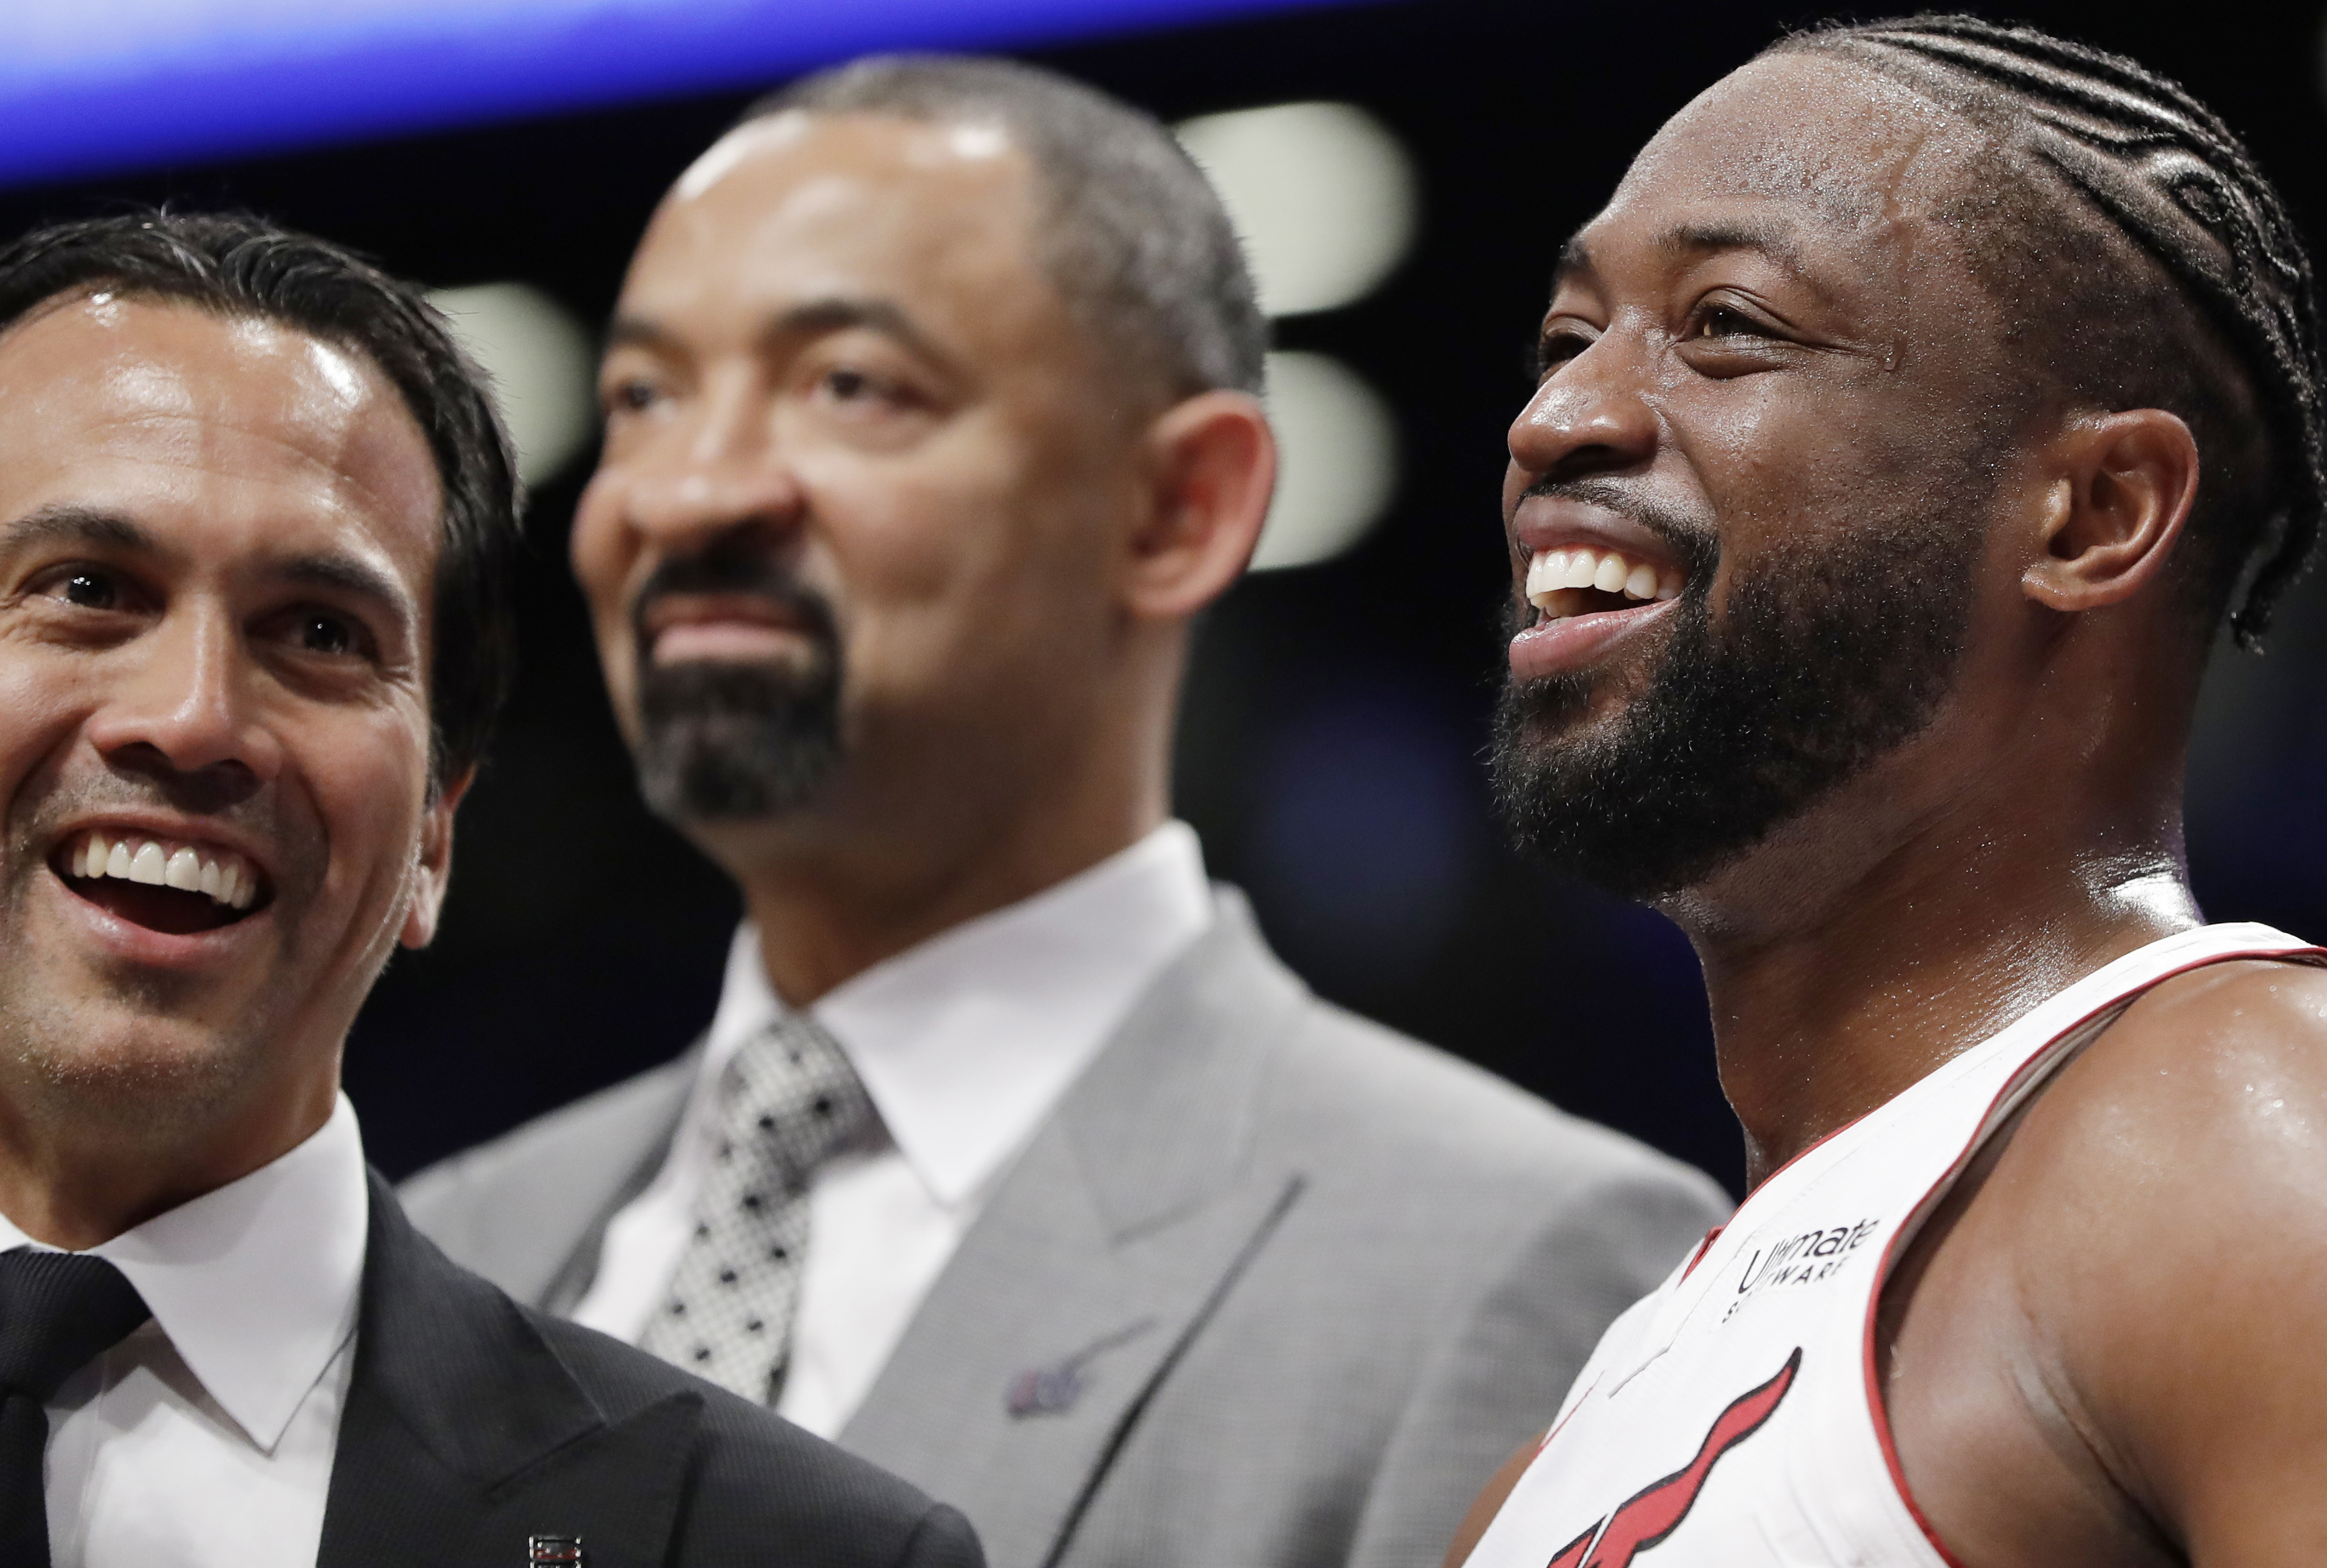 And now, the Heat prepare for life after Dwyane Wade